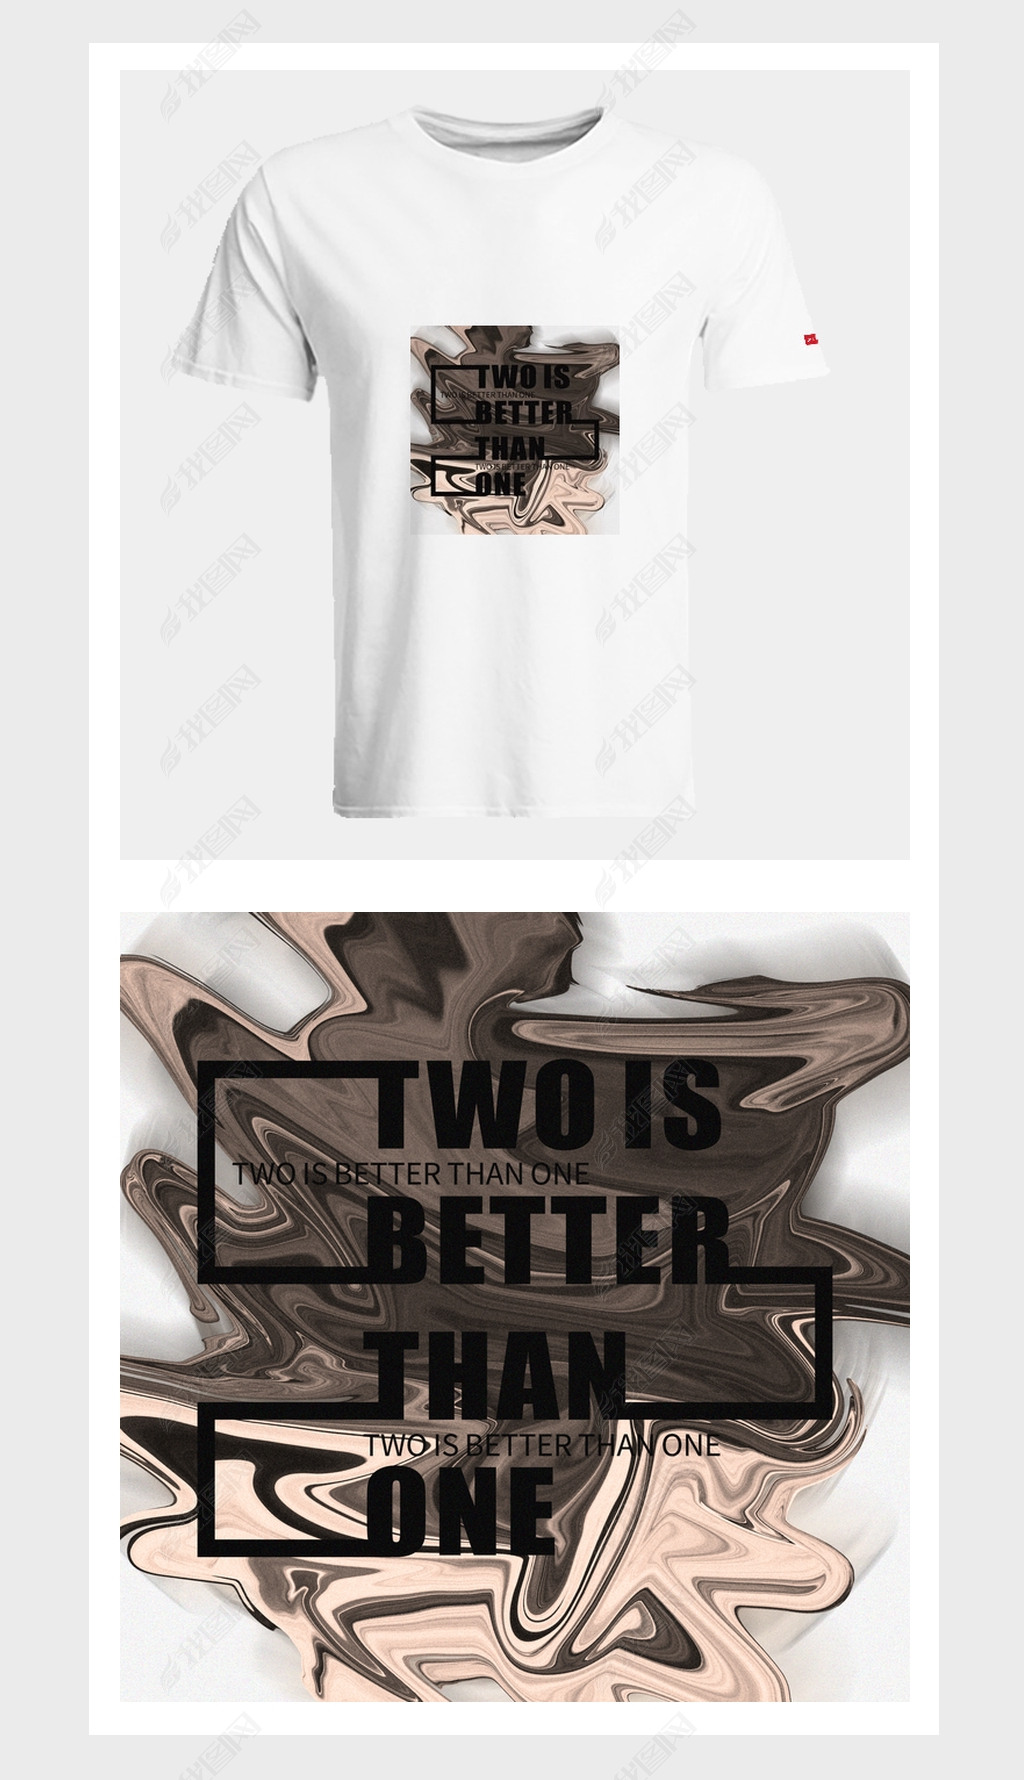 Two Is Better Than OneӢĸ